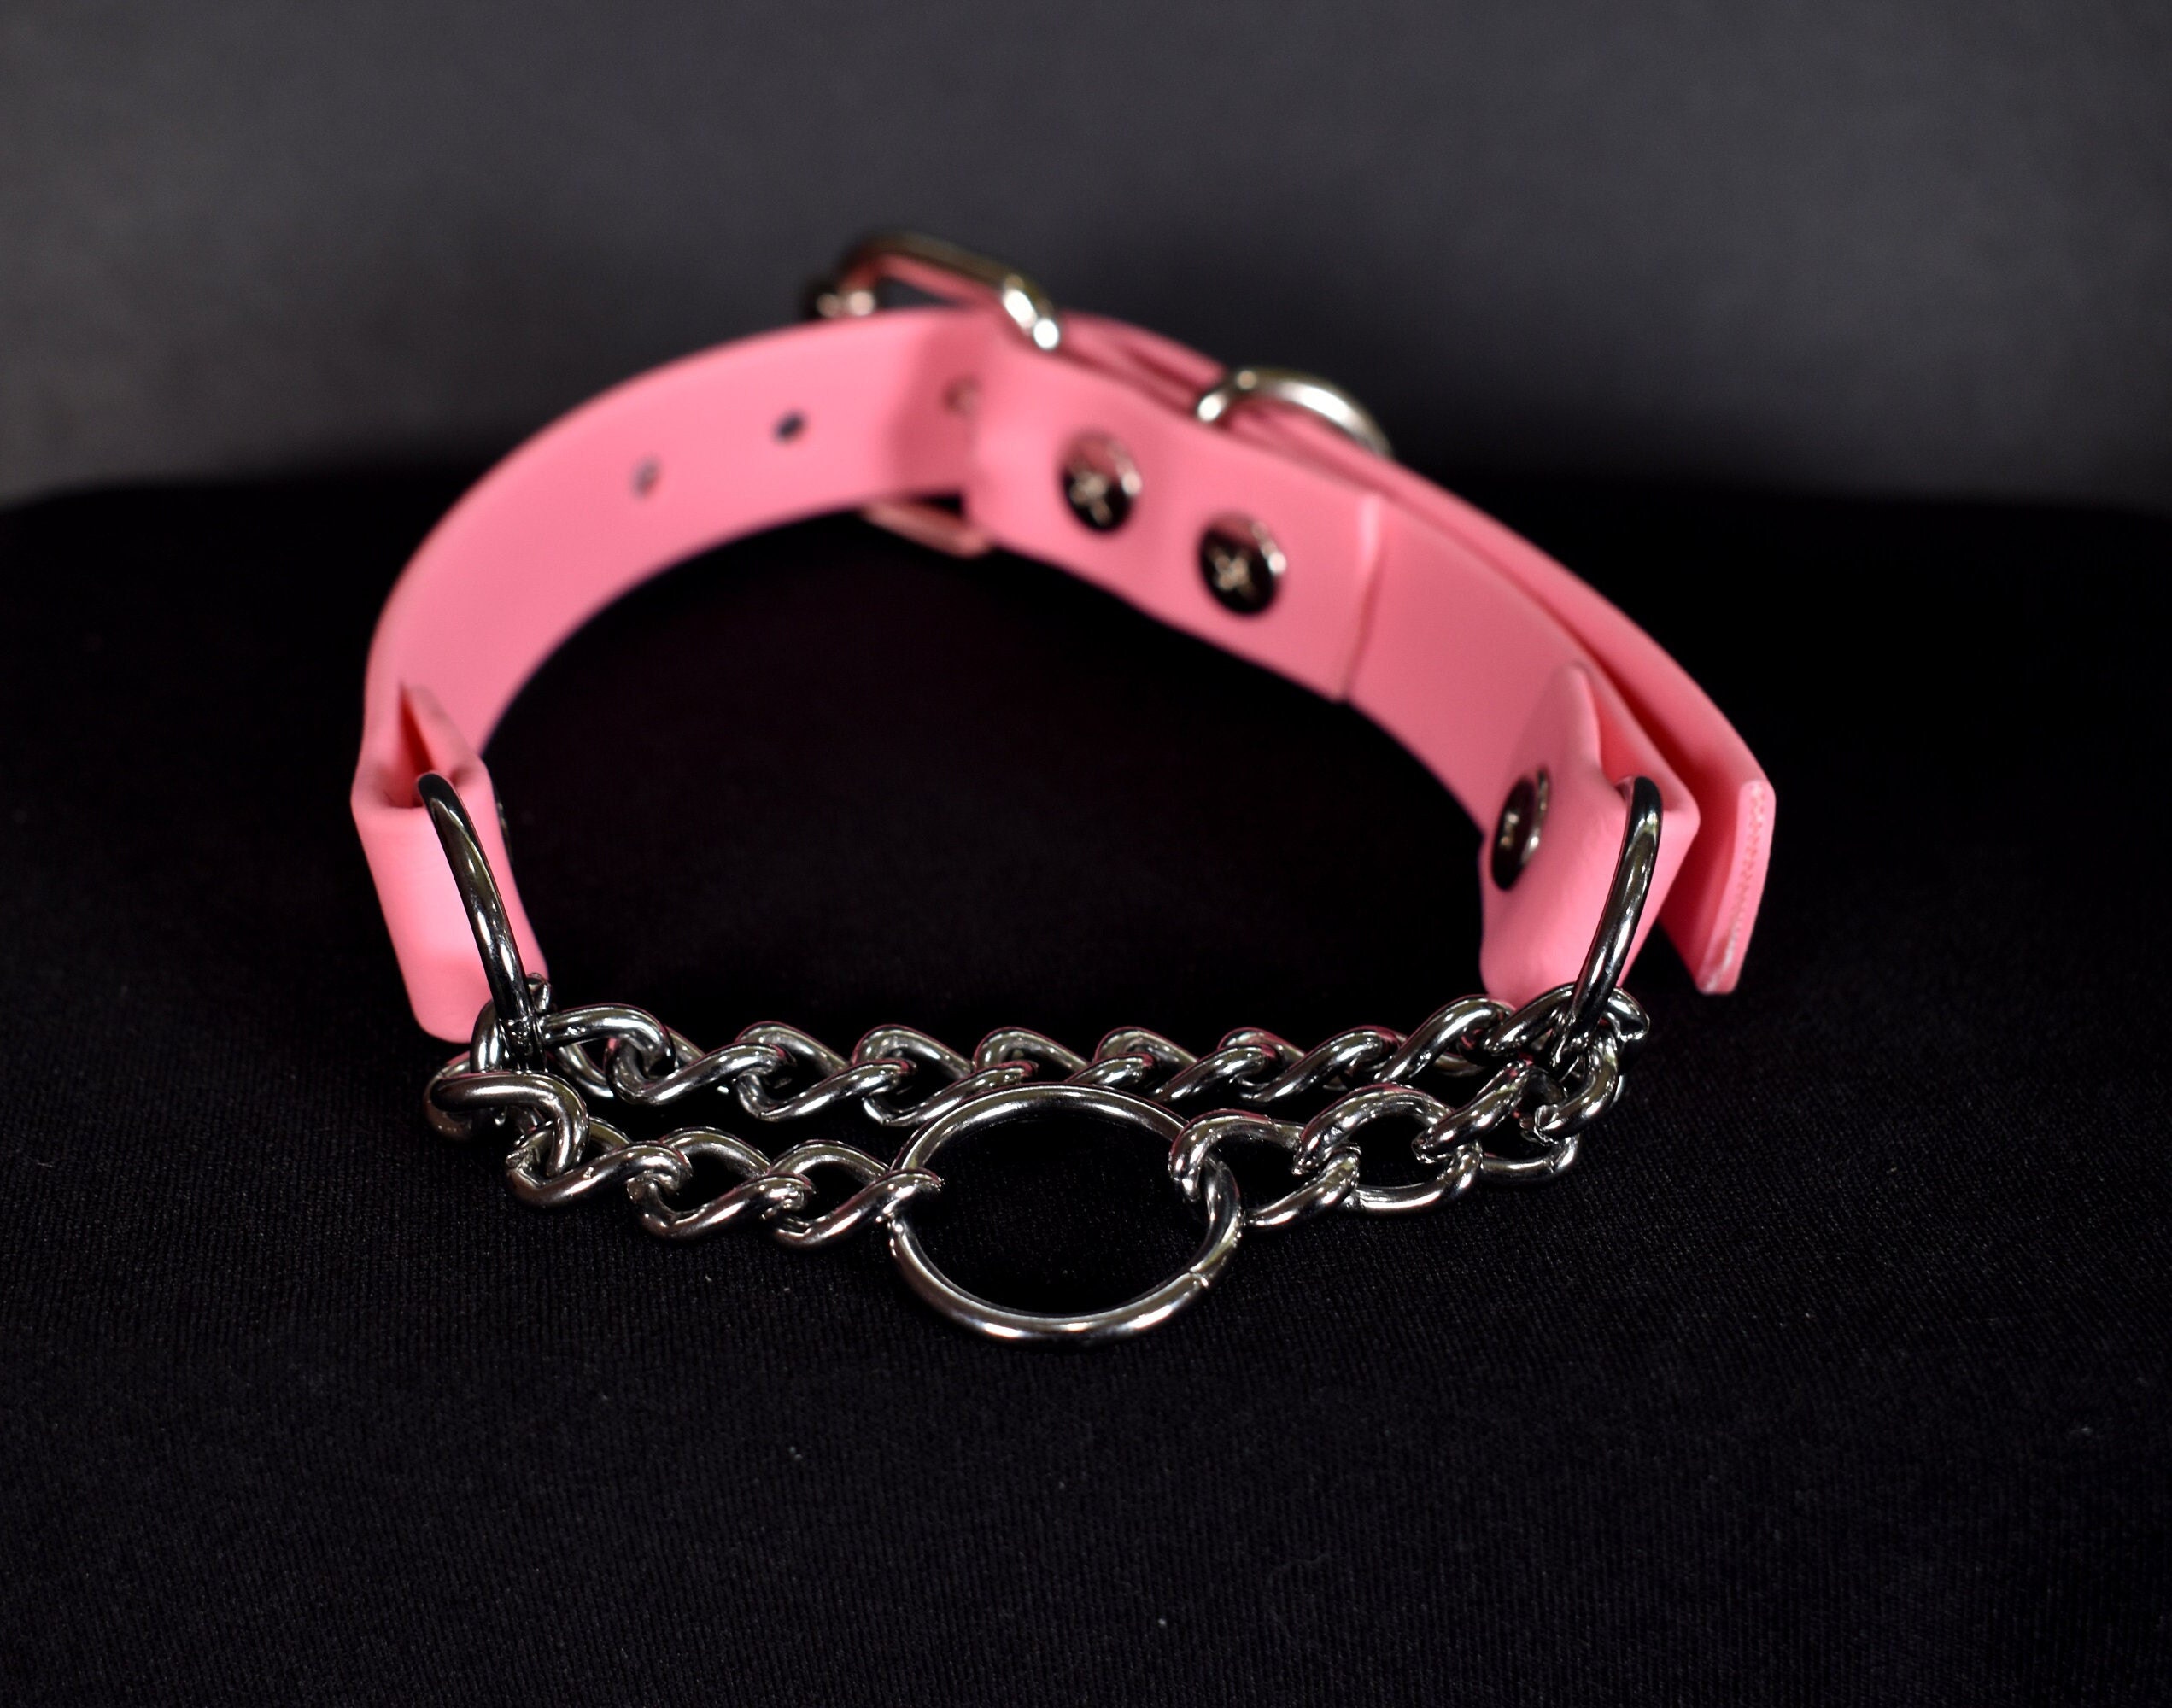 Pink Biothane Martingale 3/4 Inch Short Chain Small Ring (Vegan Leather) photo